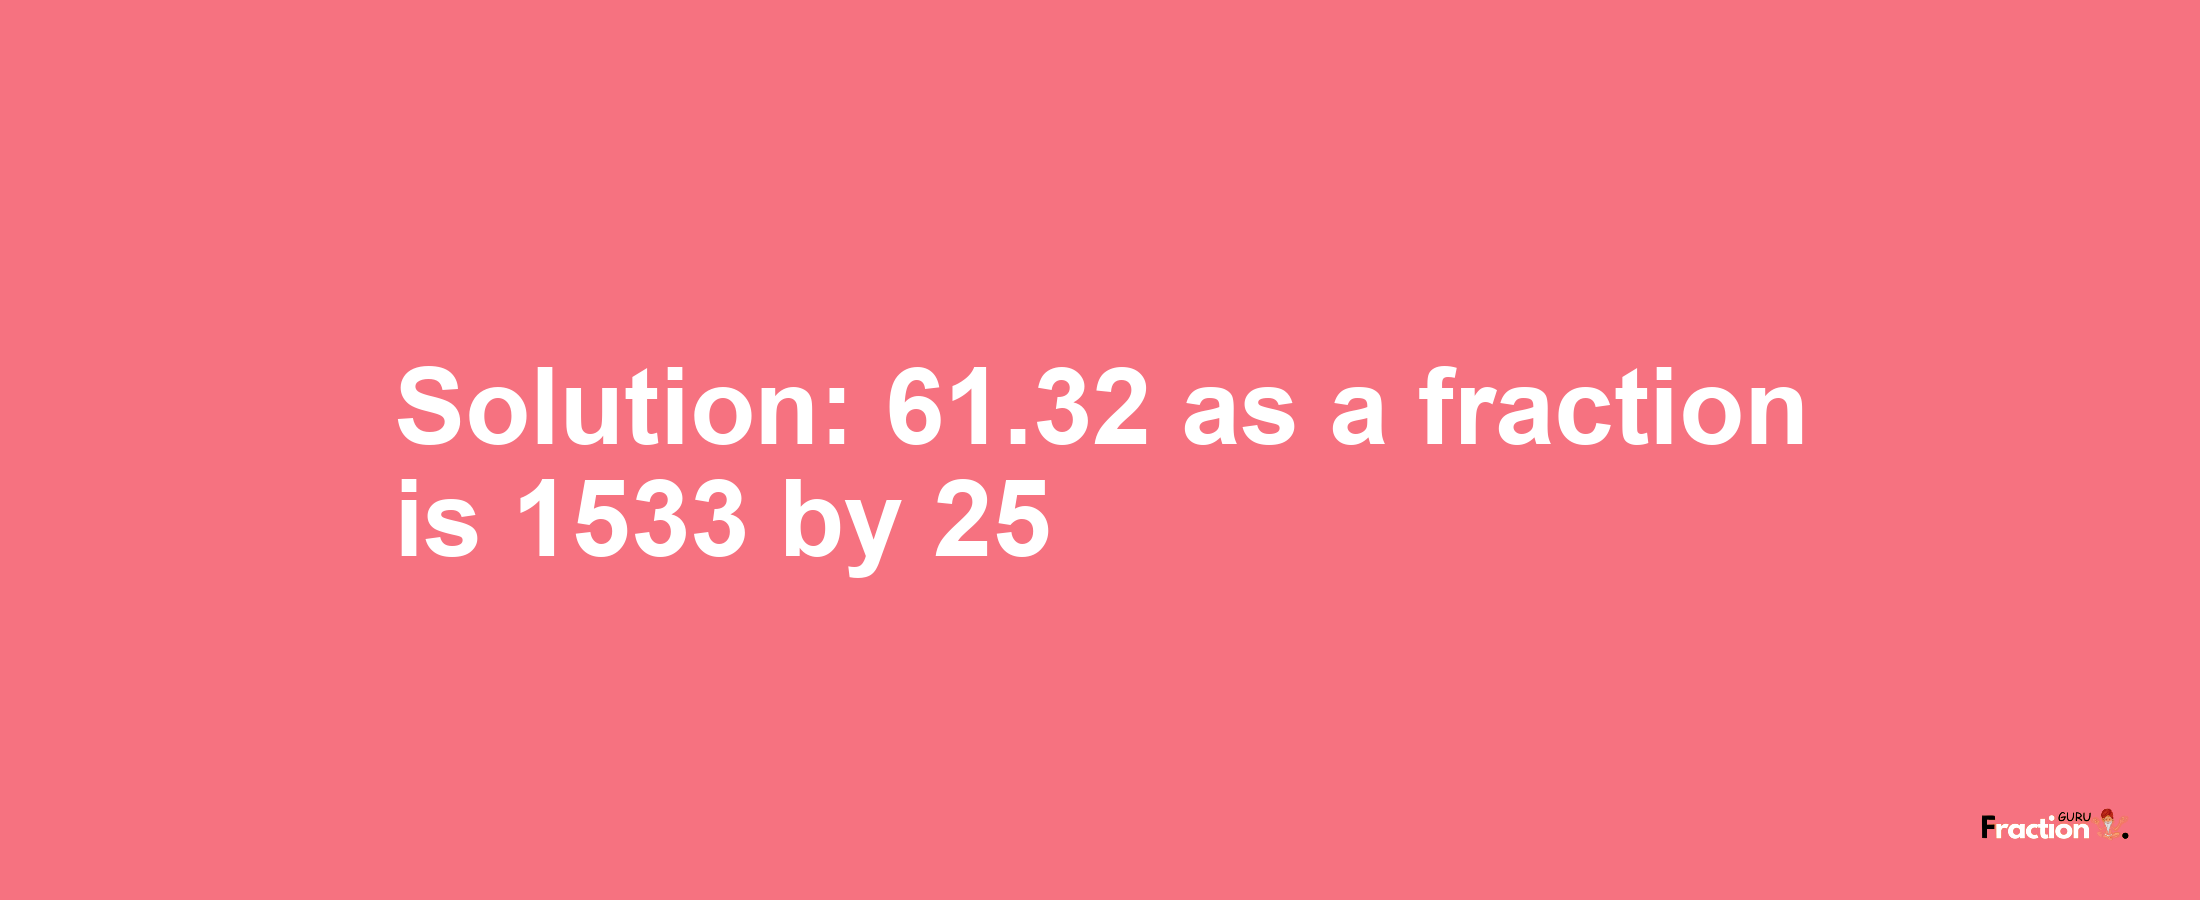 Solution:61.32 as a fraction is 1533/25